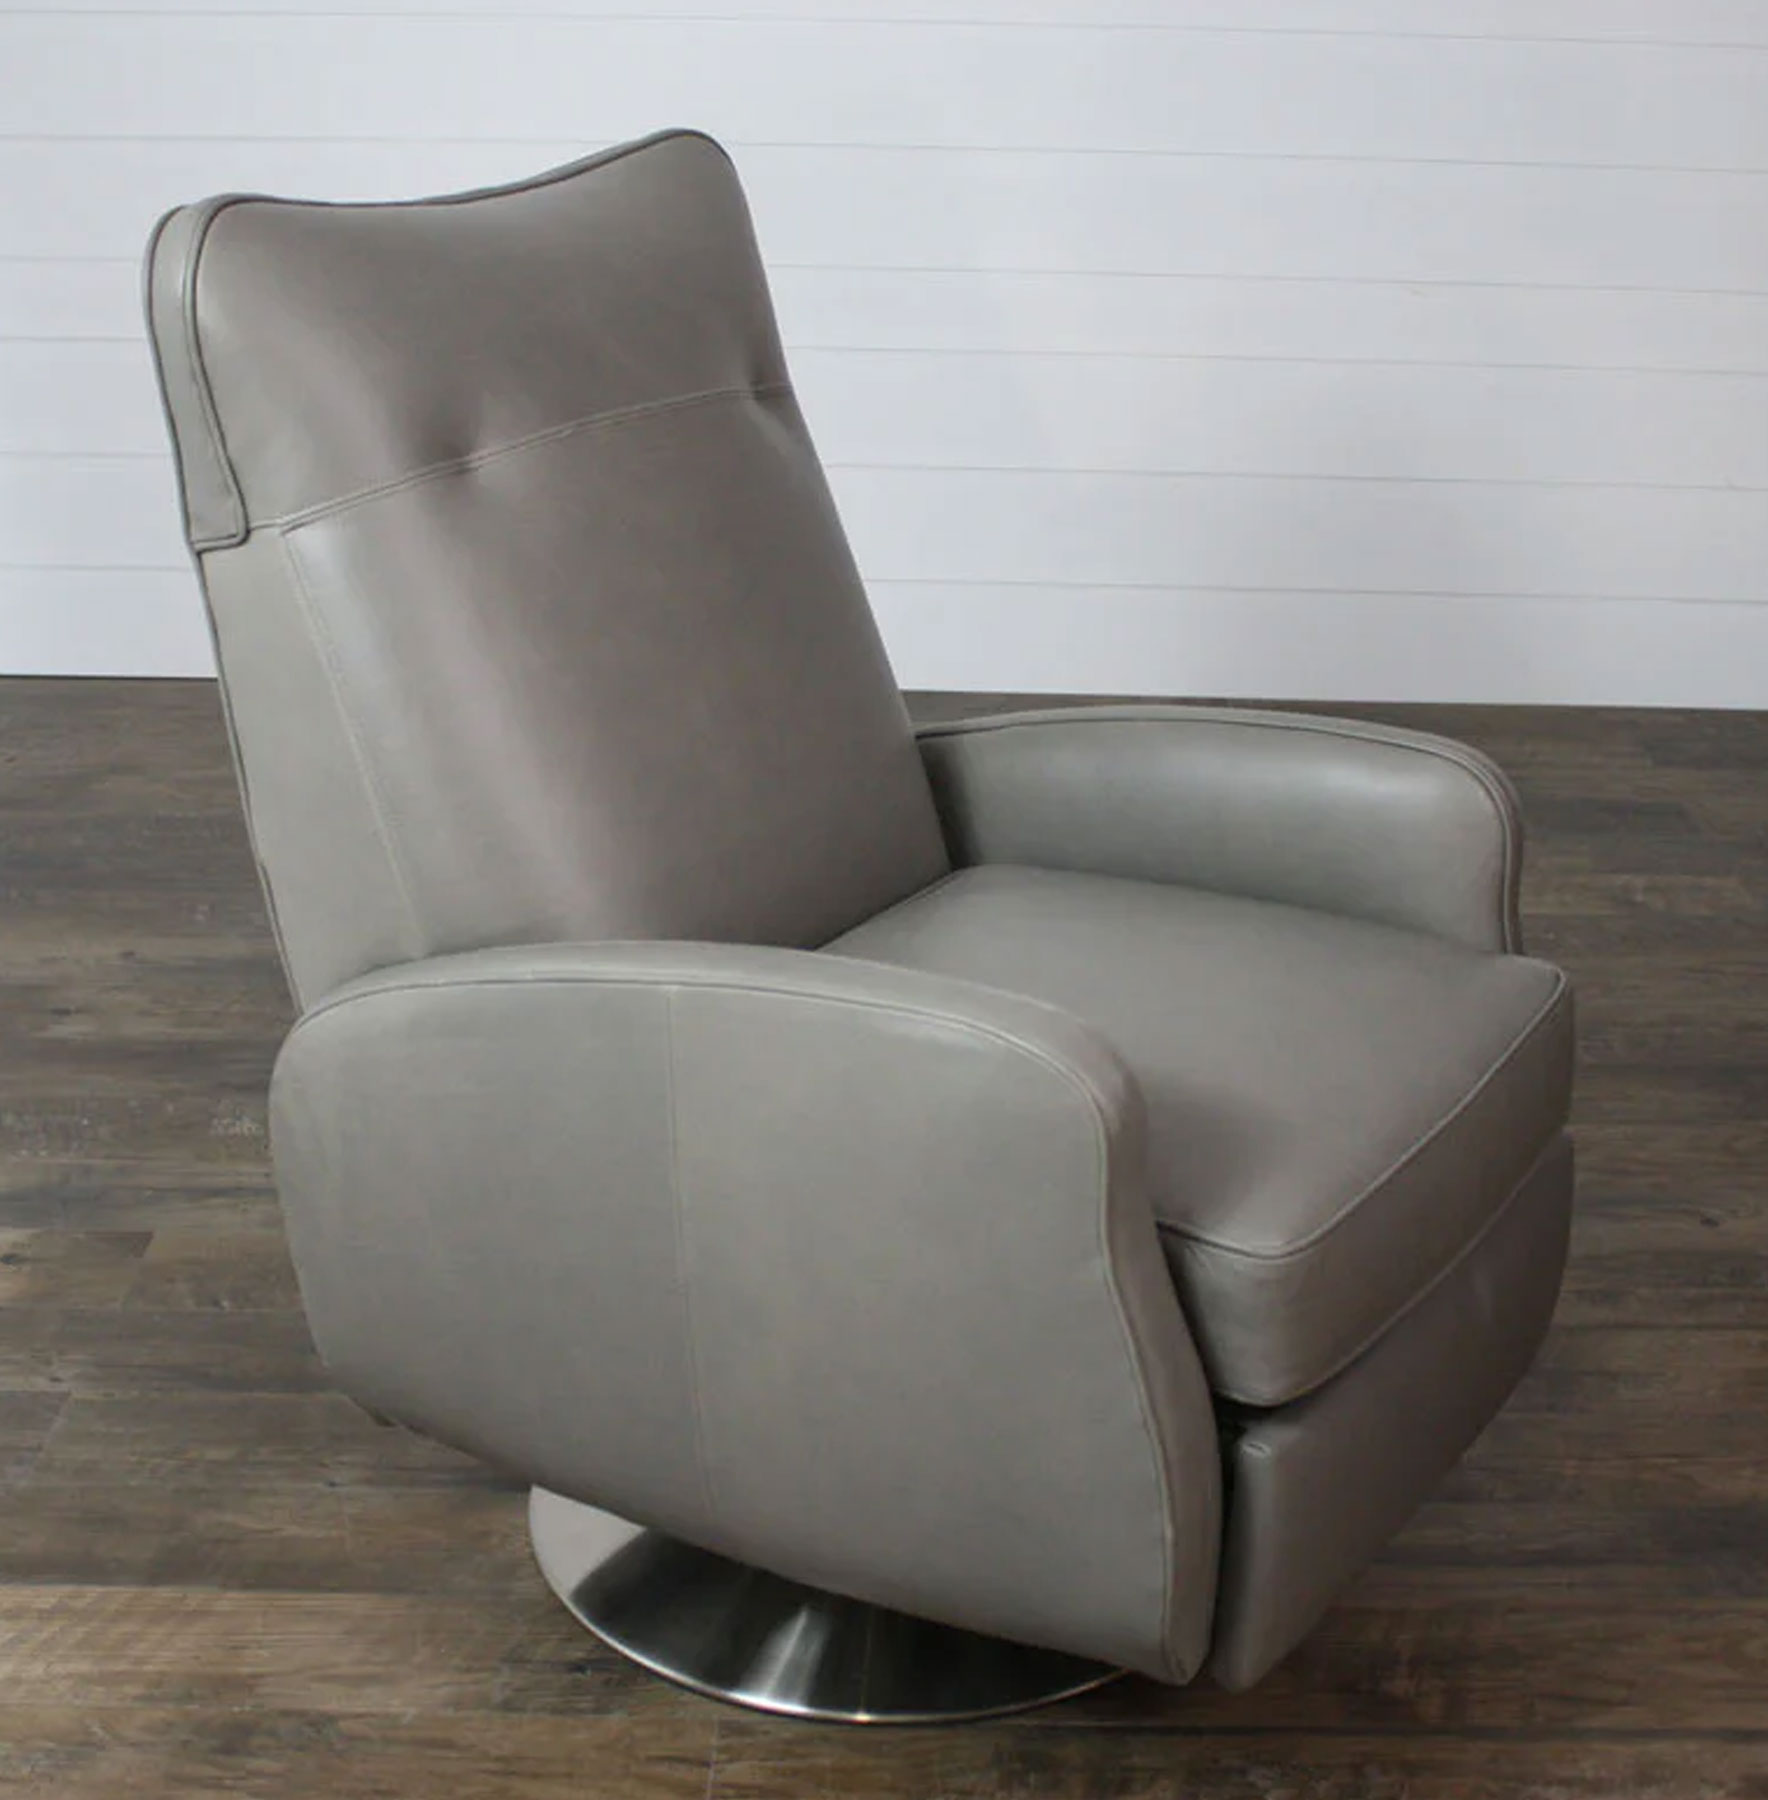 Leathercraft 4587 Contempo Swivel Recliner in Natural London Fog Leather